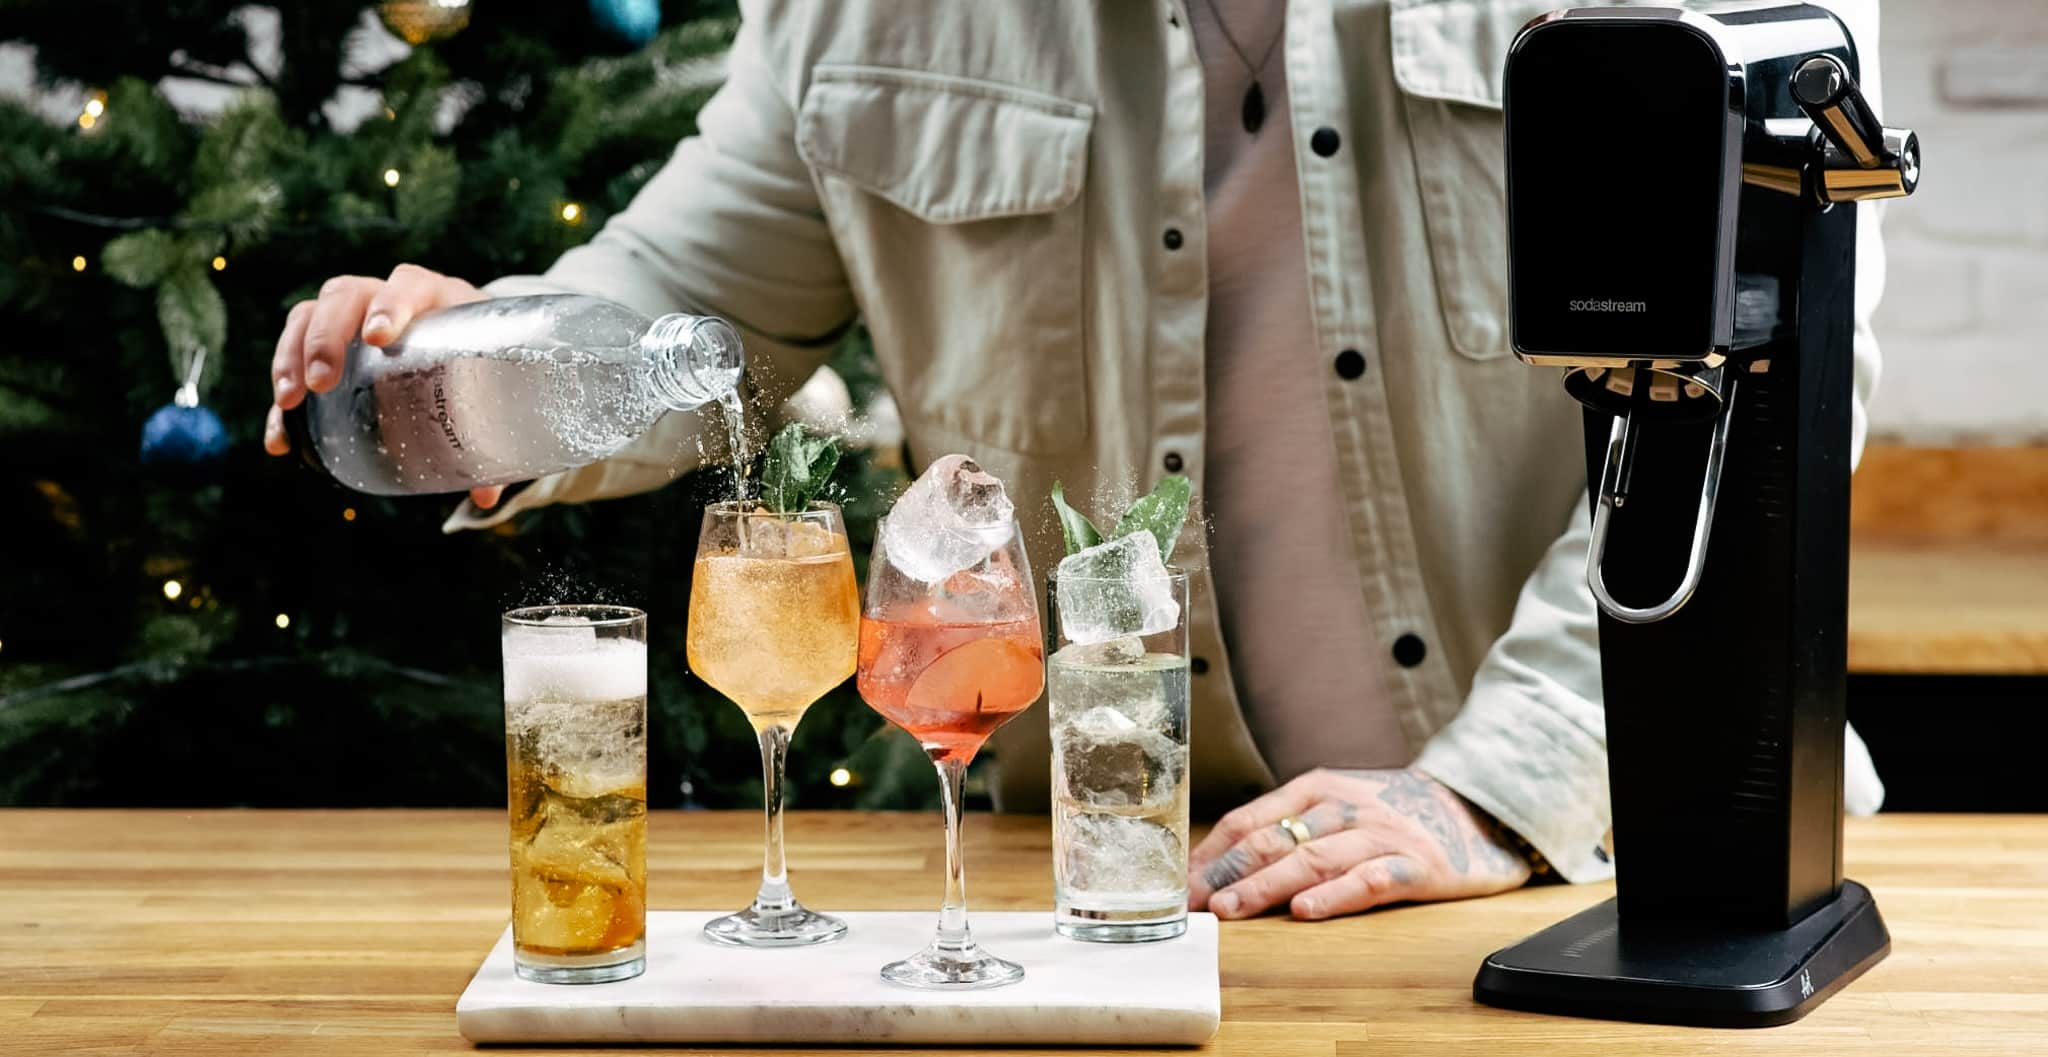 Dreaming of a dry(er) christmas: two-fifths plan to cut back on alcoholic beverages this festive season